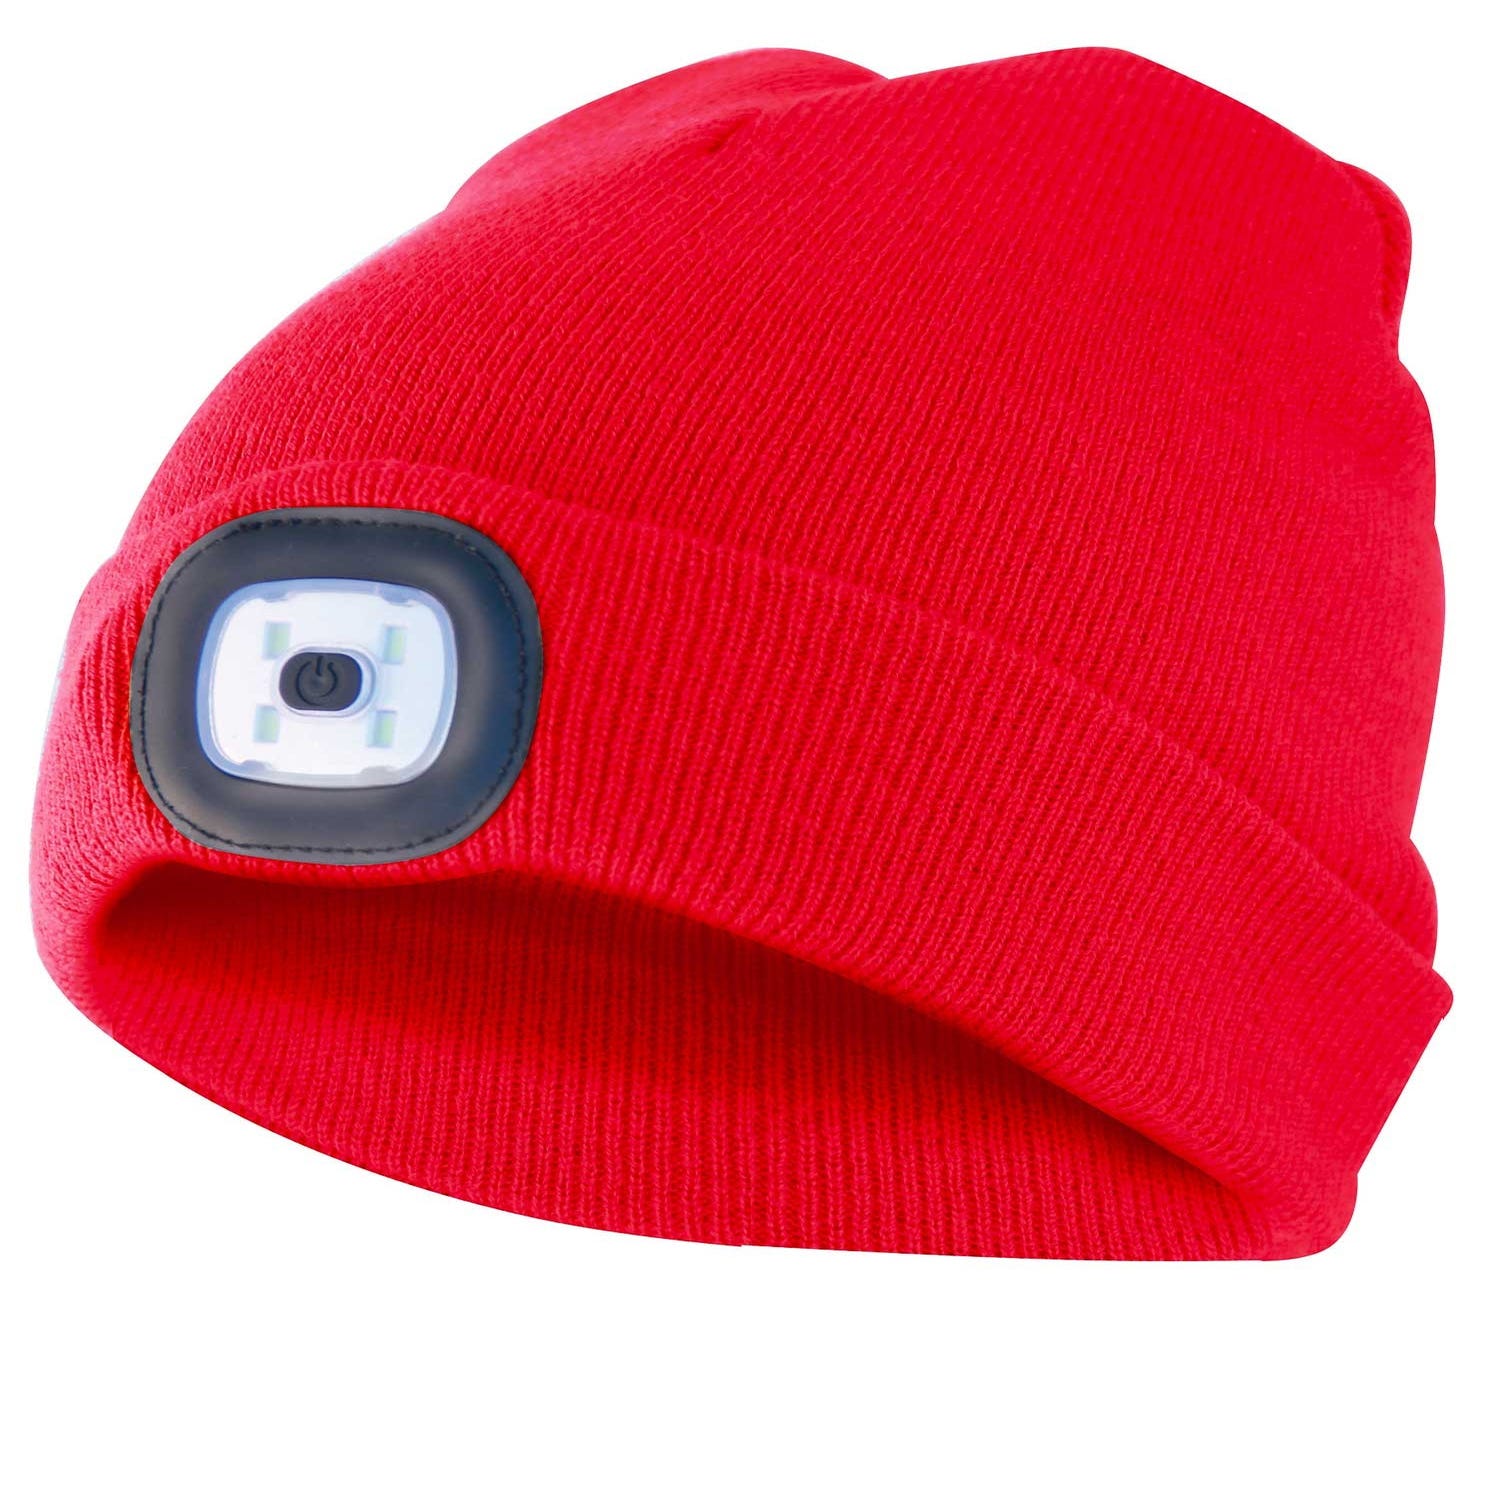 LIGHTHOUSE: cappellino con luce frontale LED ricaricabile. Rosso